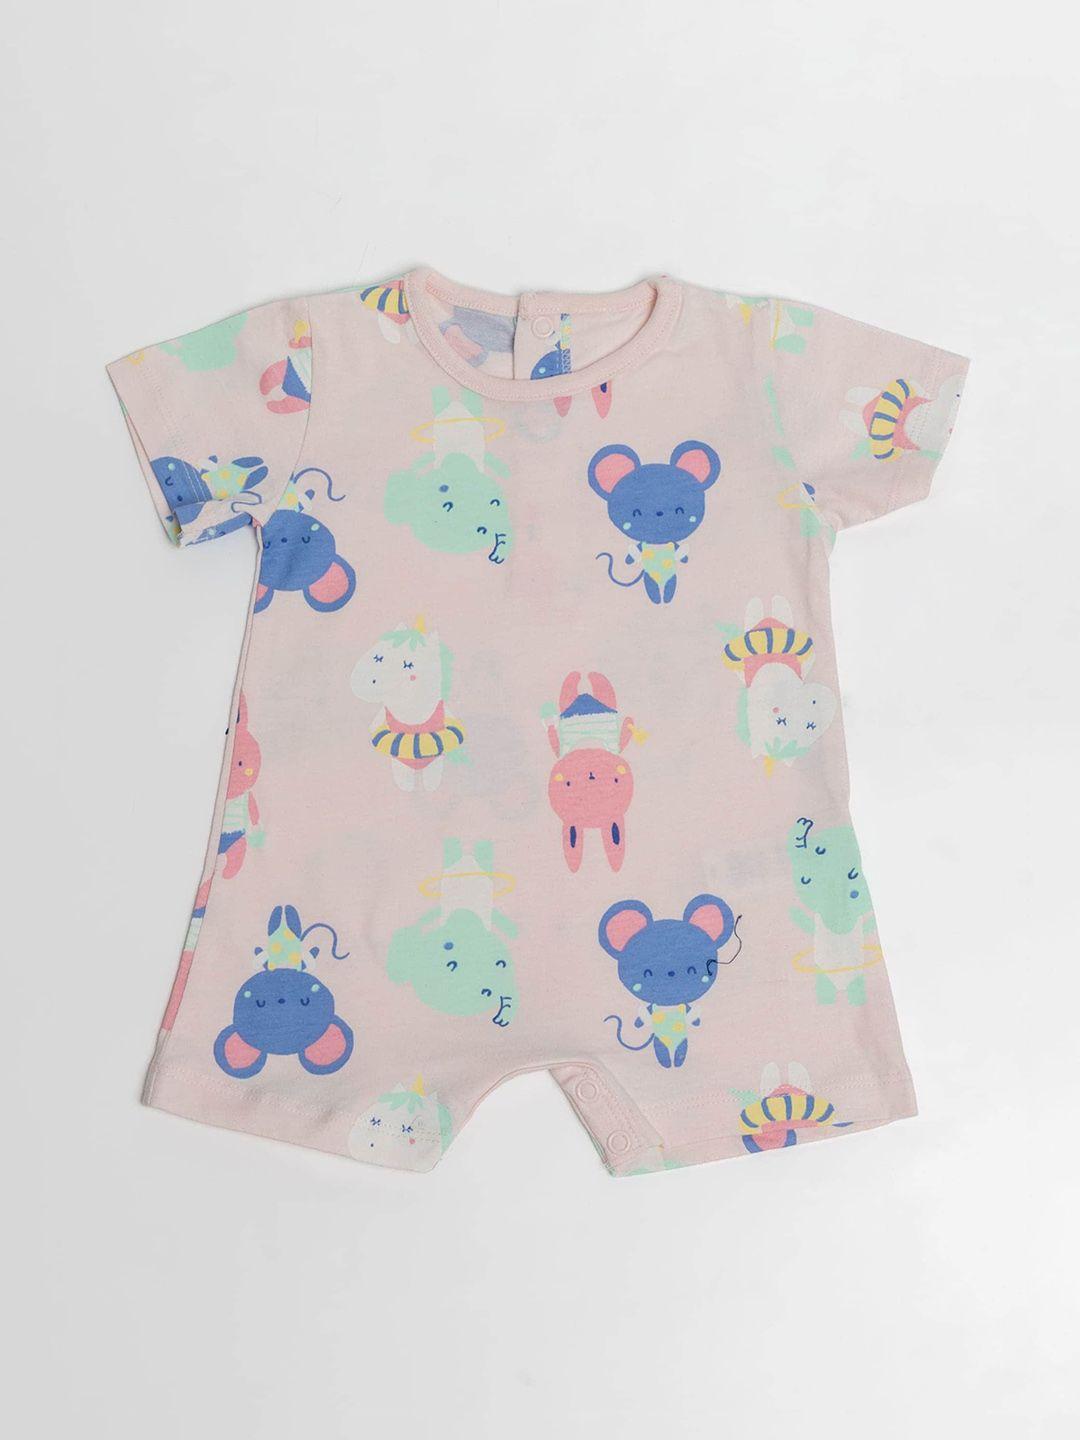 baesd-infant-girls-printed-pure-cotton-rompers